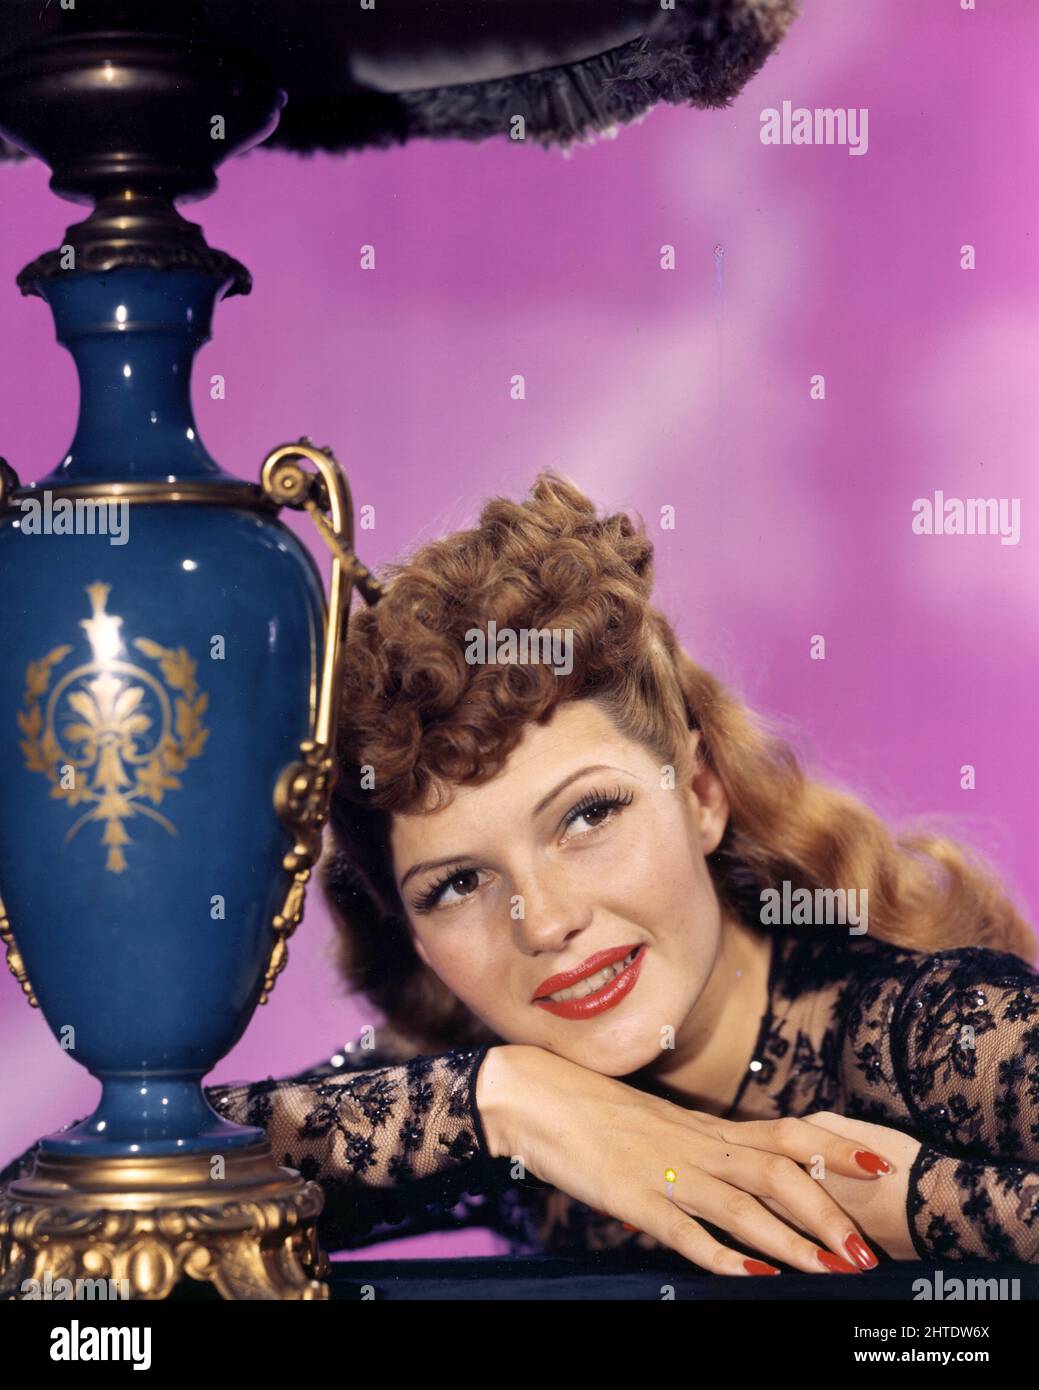 RITA HAYWORTH in COVER GIRL (1944), directed by CHARLES VIDOR. Credit: COLUMBIA PICTURES / Album Stock Photo